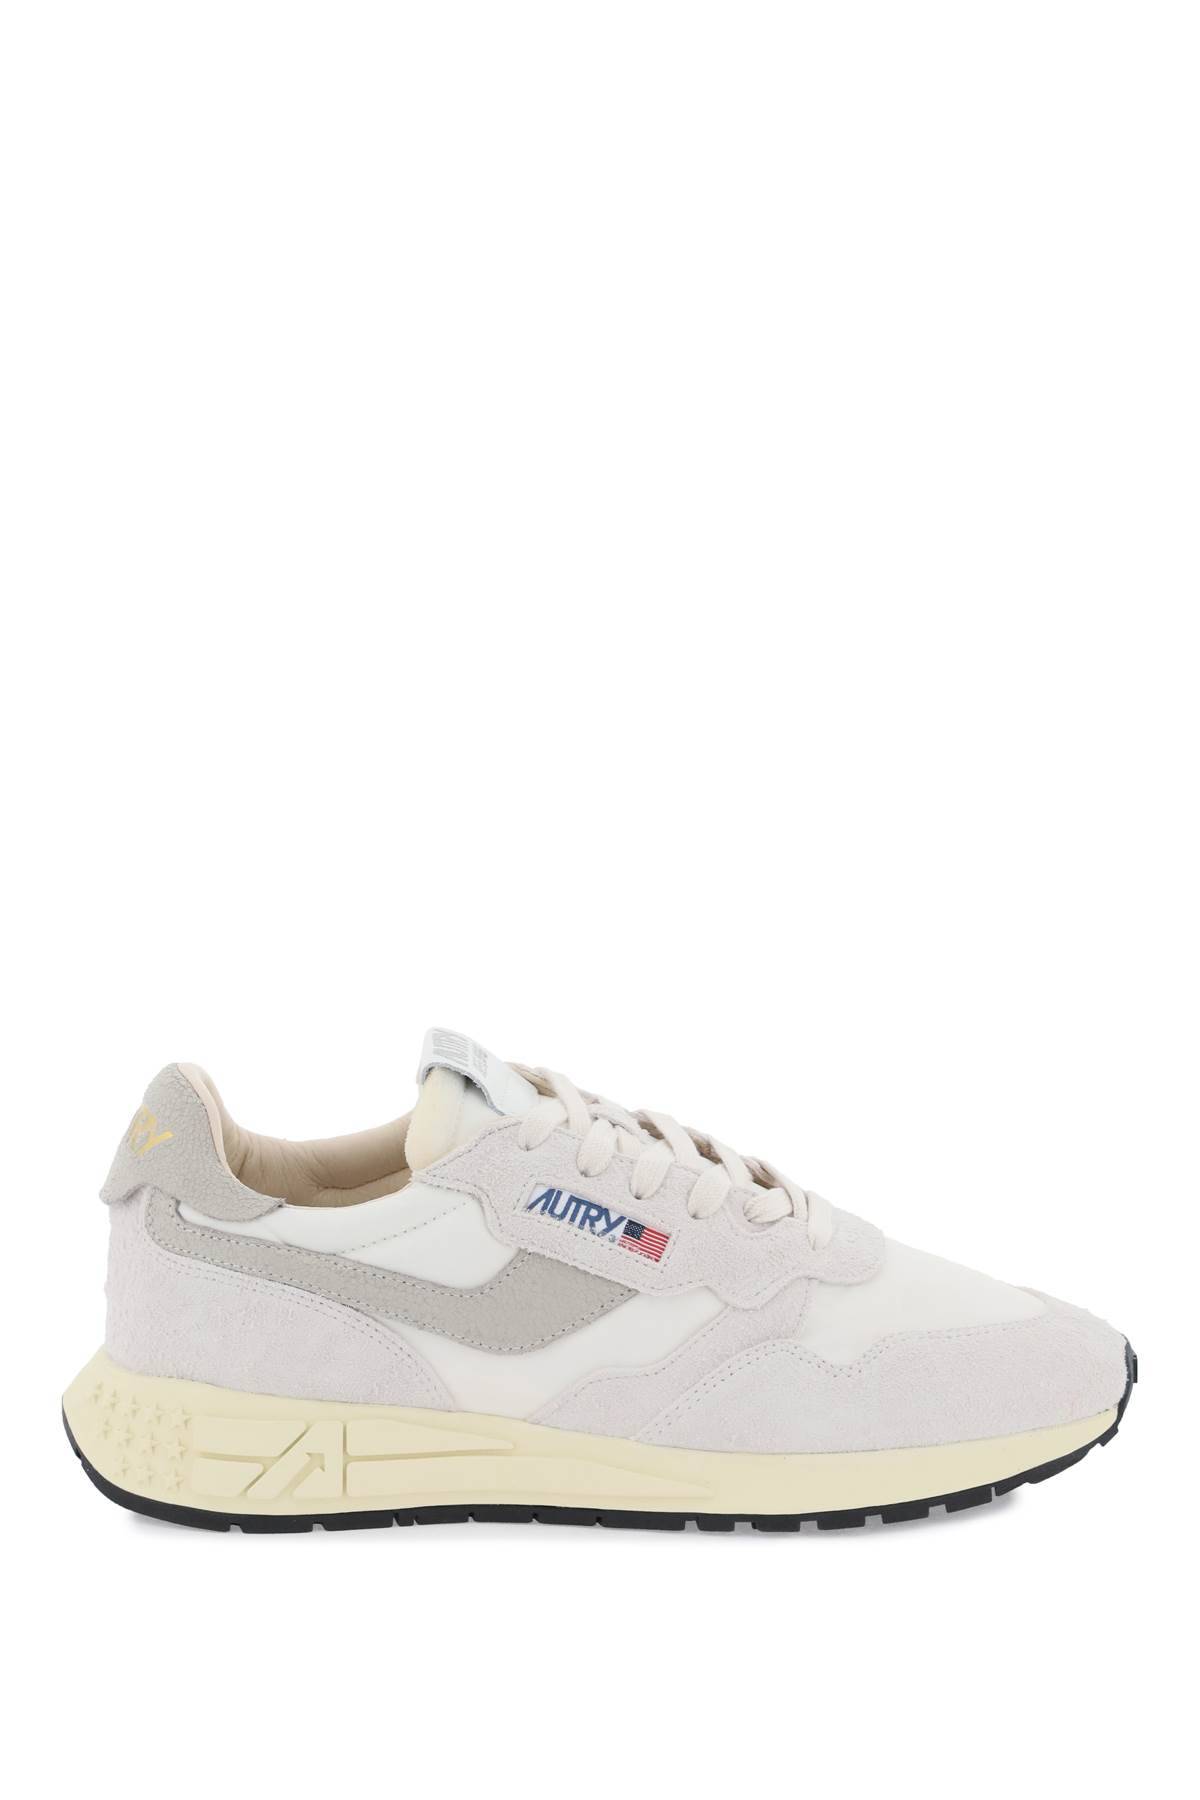 AUTRY AUTRY reelwind low-top nylon and suede sneakers